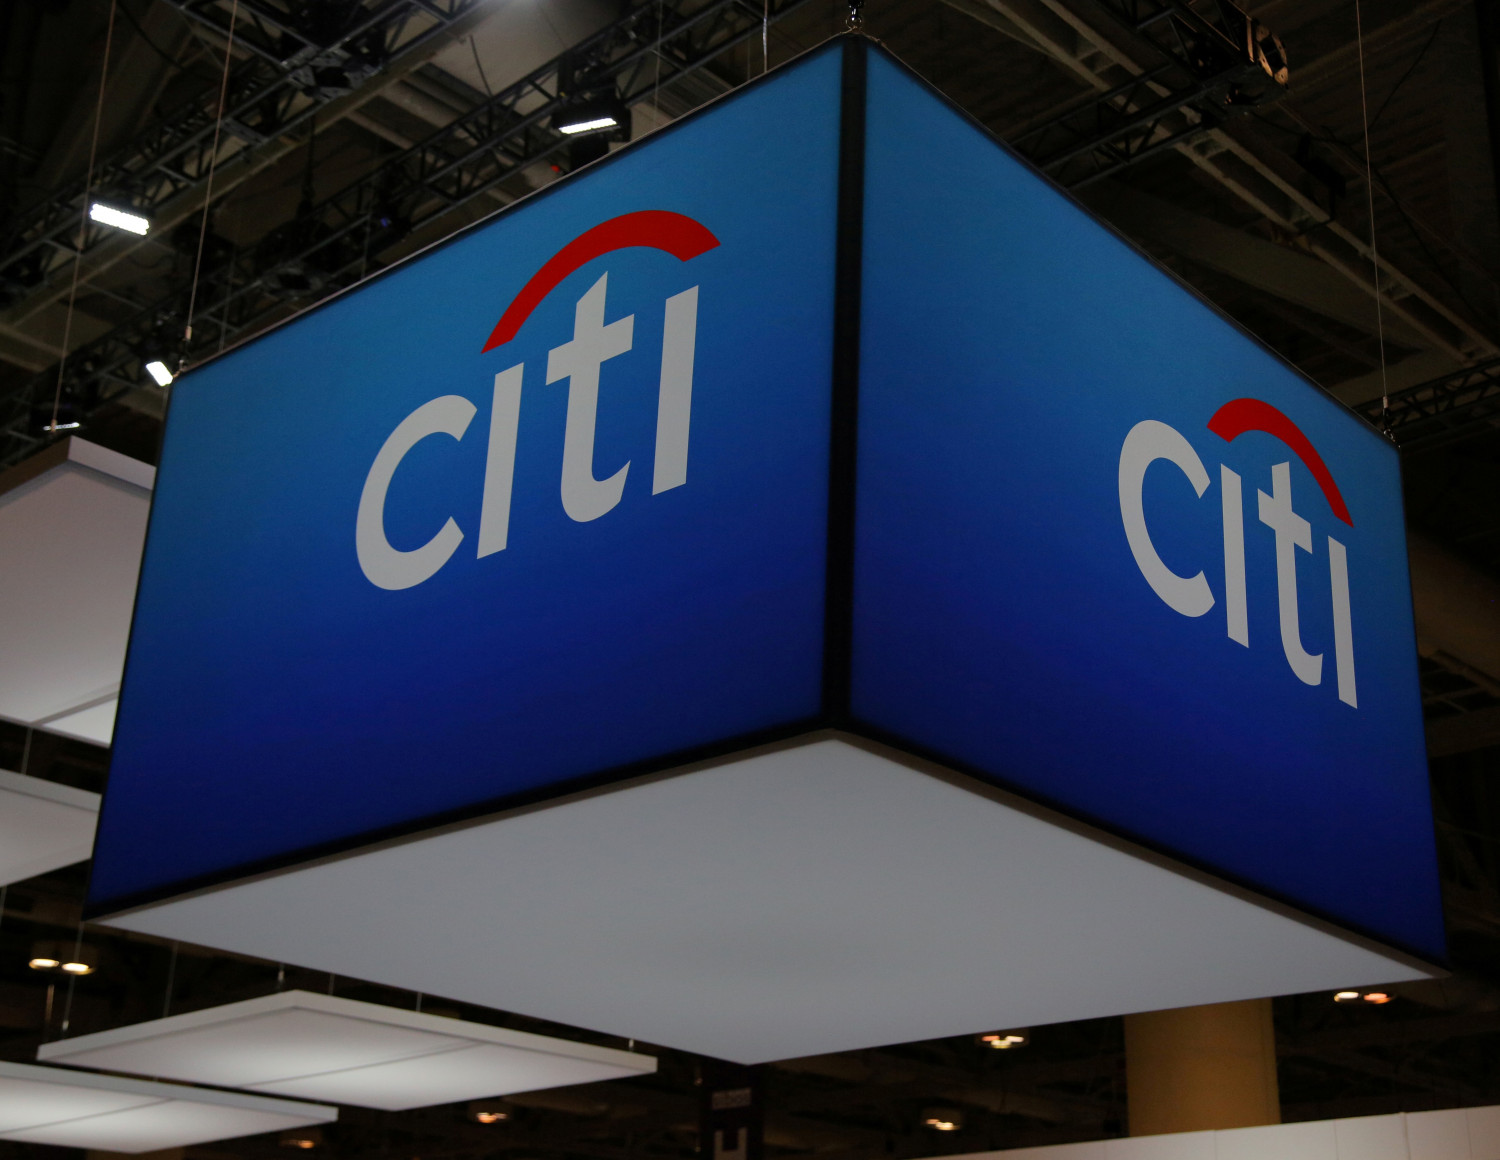 Citigroup Stopped From Underwriting $3.4 Billion Texas Bond for ‘Discriminating’ Against Gun Industry